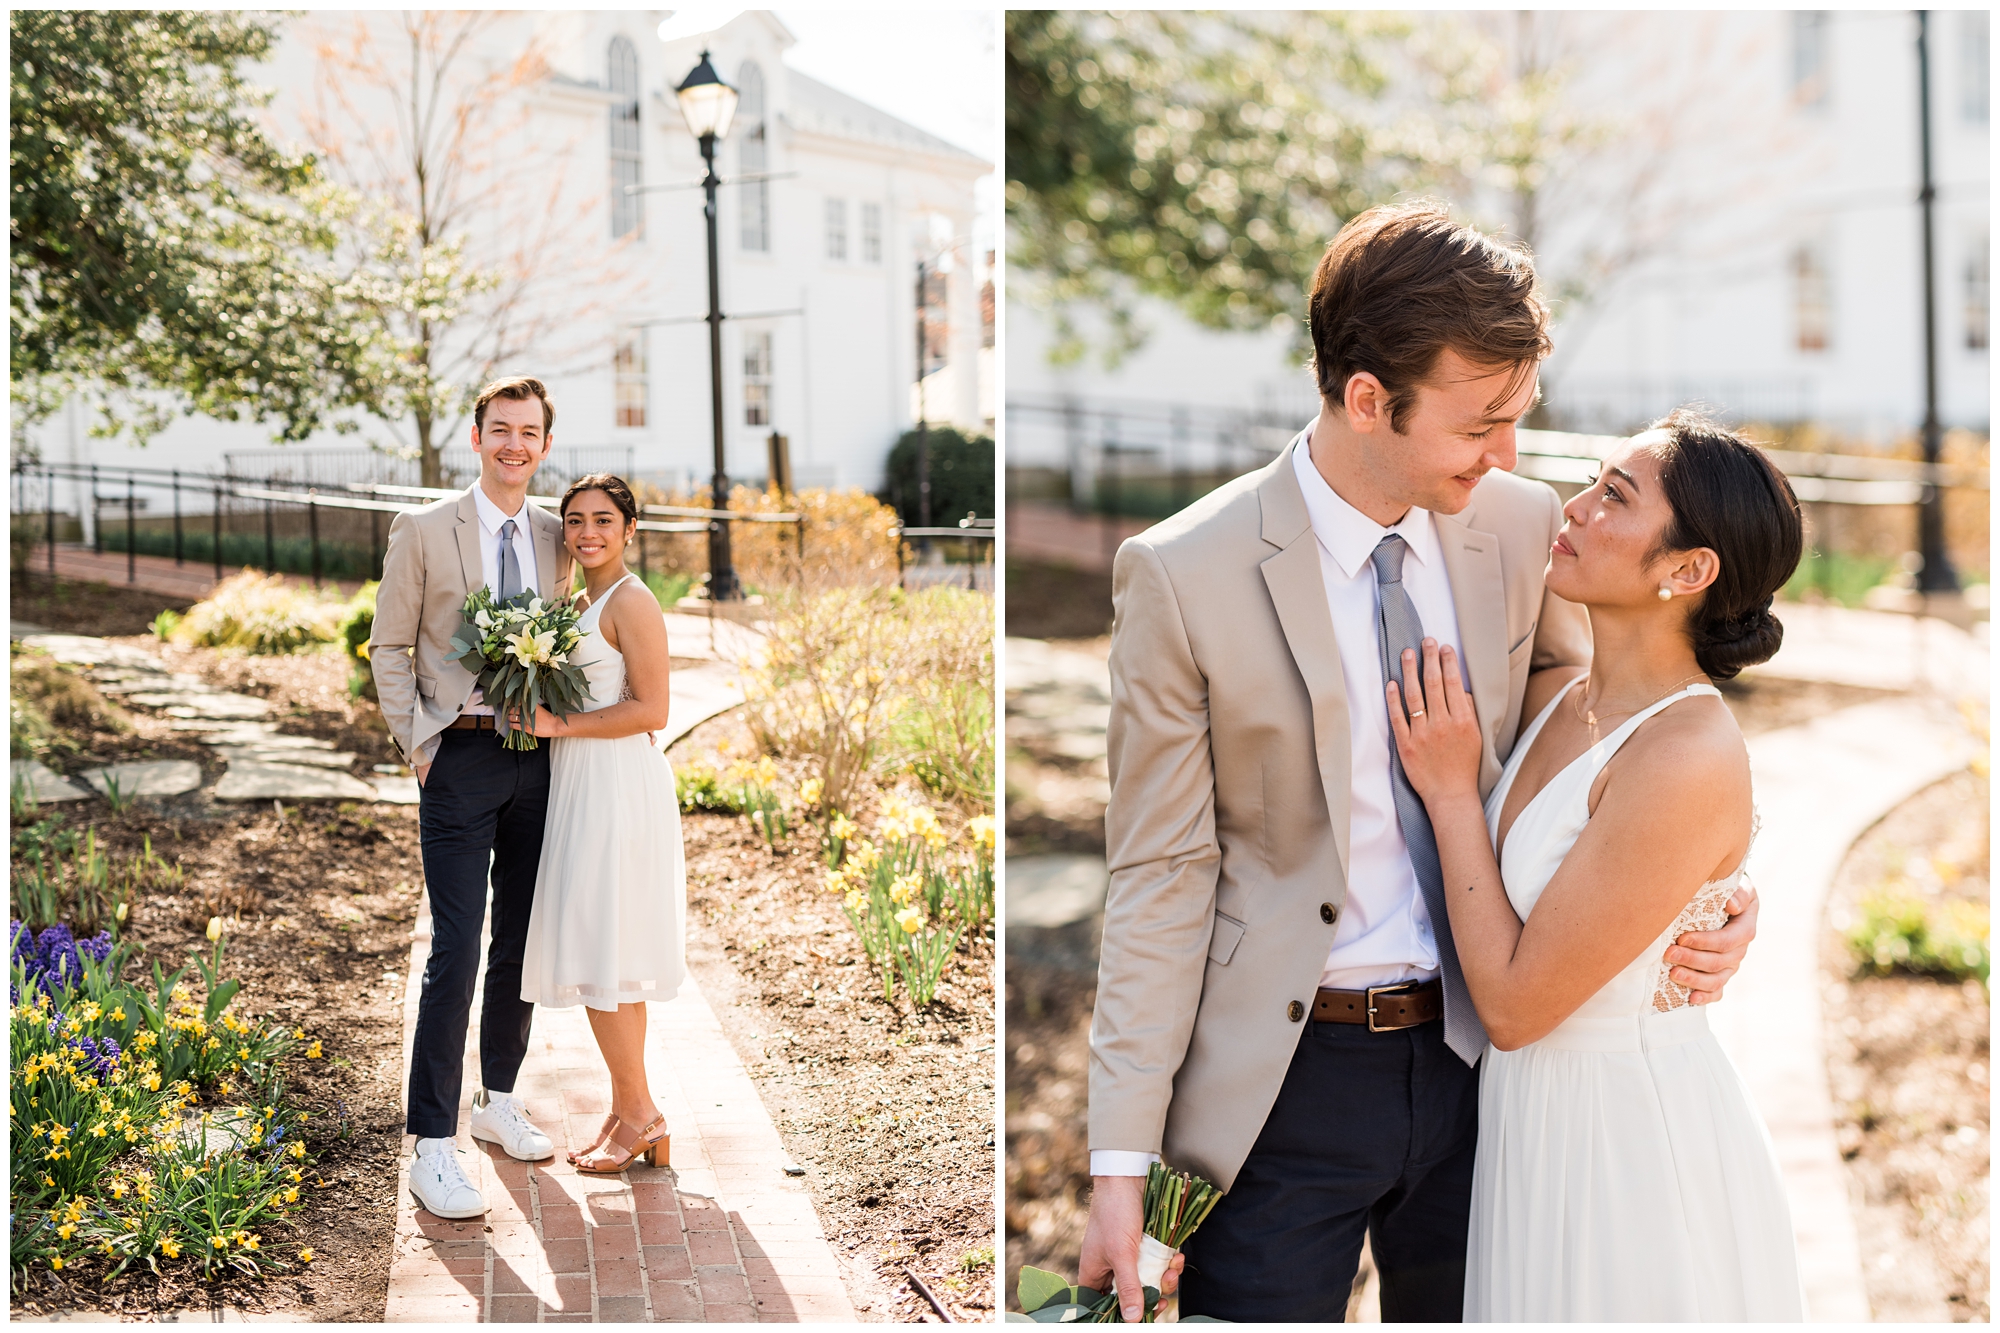 Courthouse Wedding, Intimate Elopement in Northern Virginia